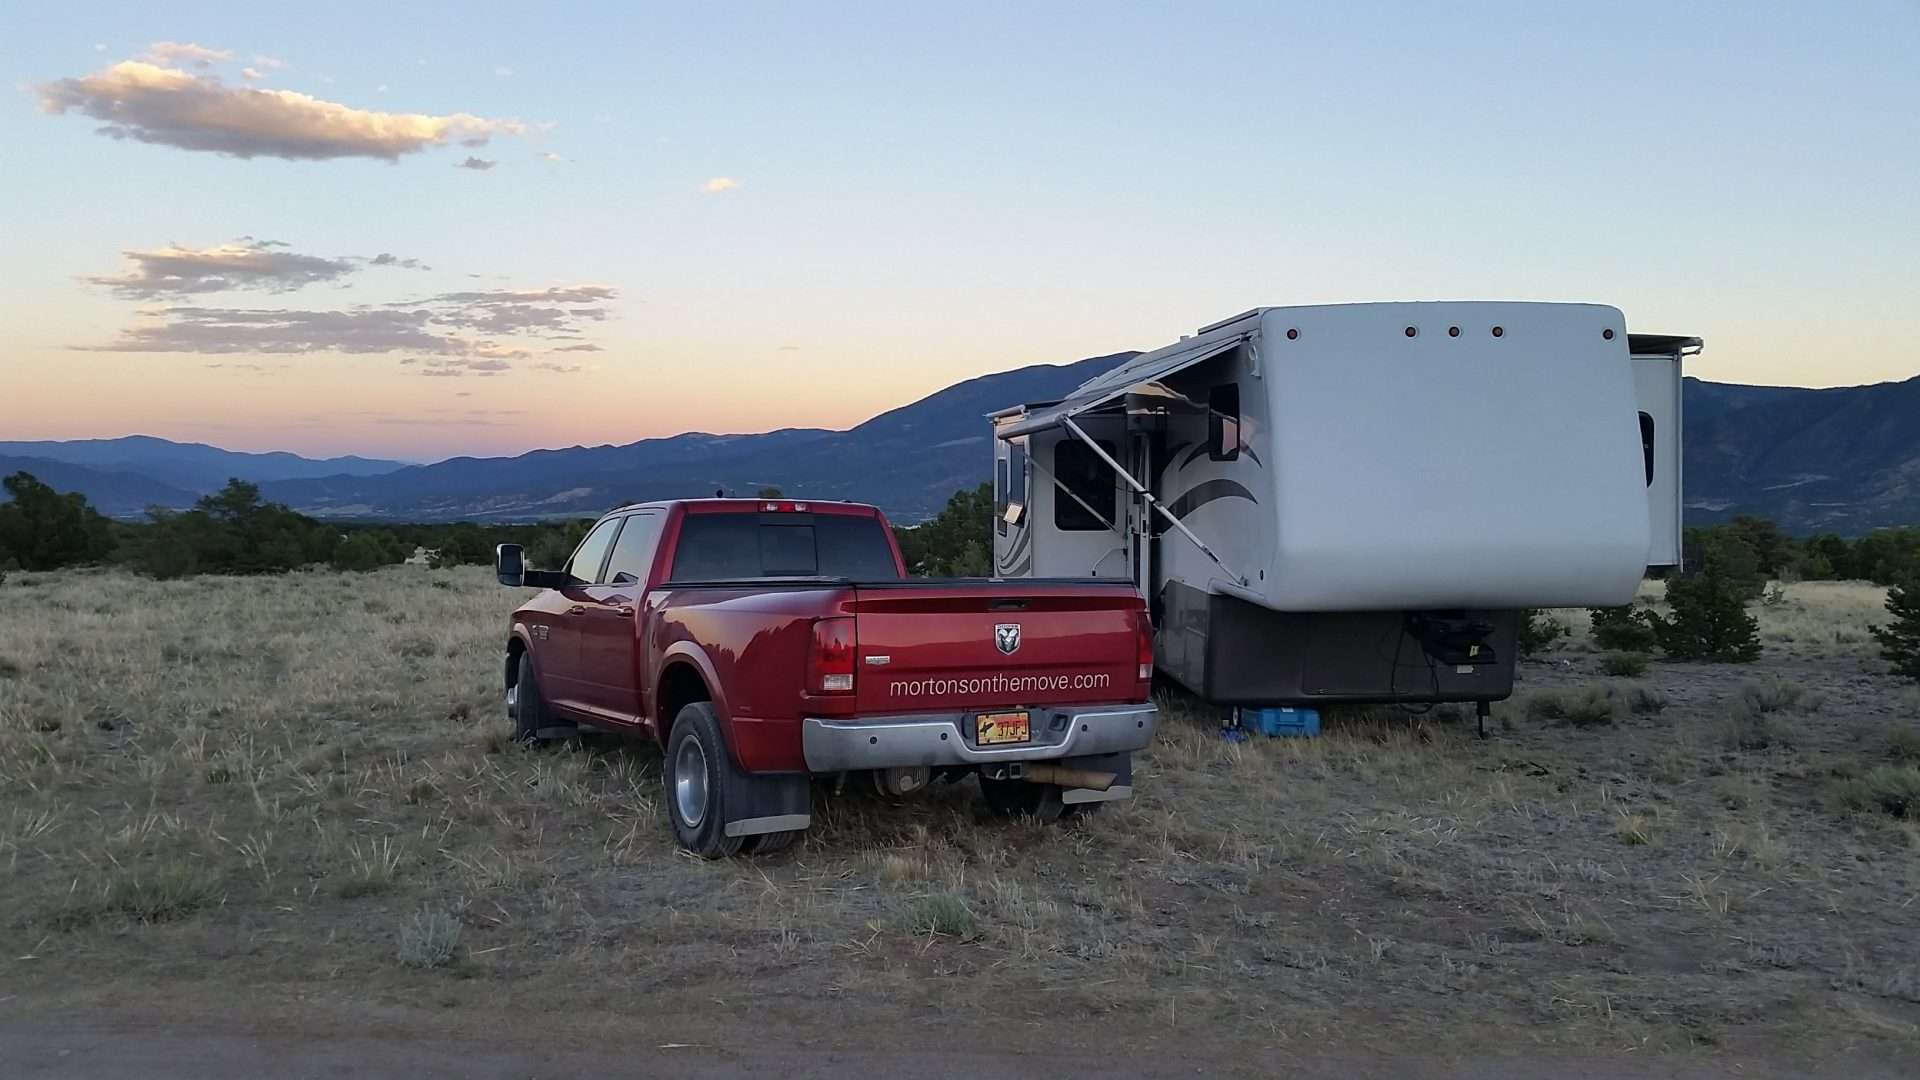 Mortons on the Move truck and fifth wheel parked while boondocking at sunset.